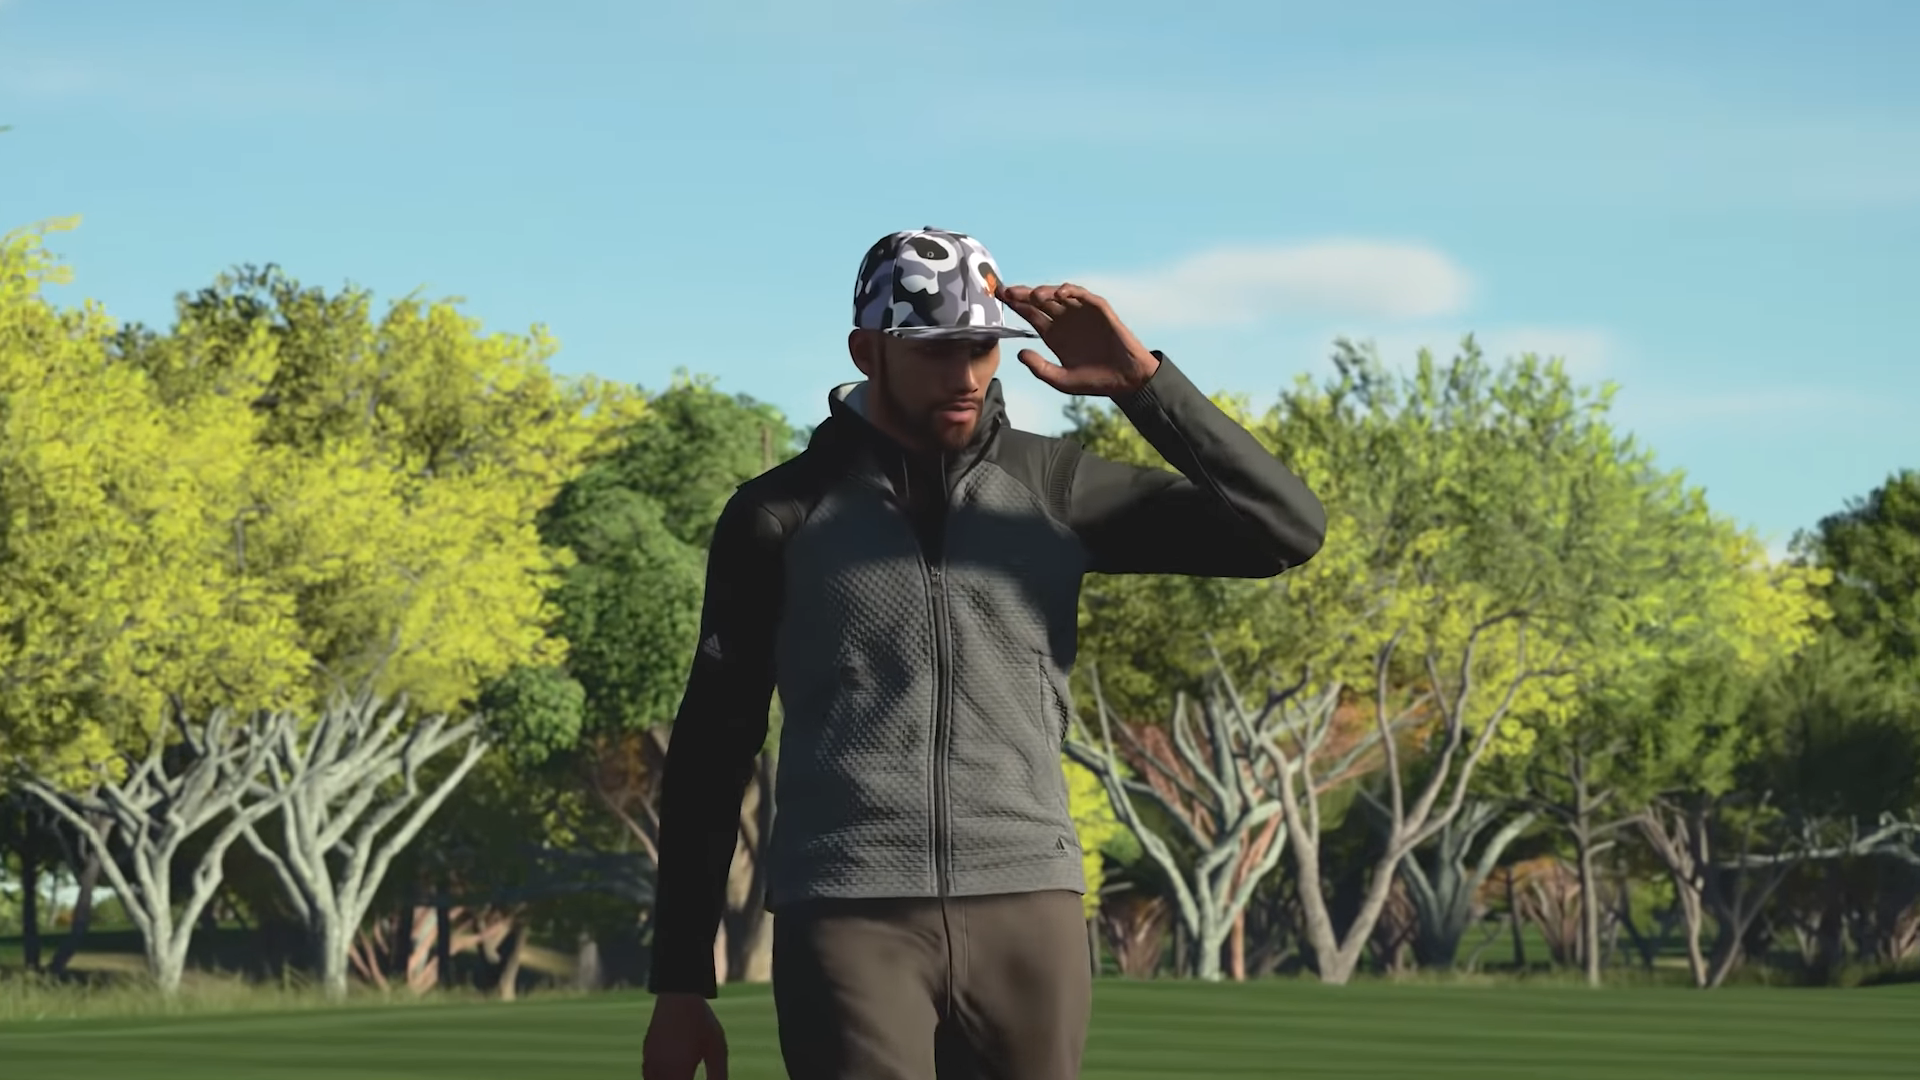  Everything we know about PGA Tour 2K21 – Pre-order bonuses, rosters, courses, new features 